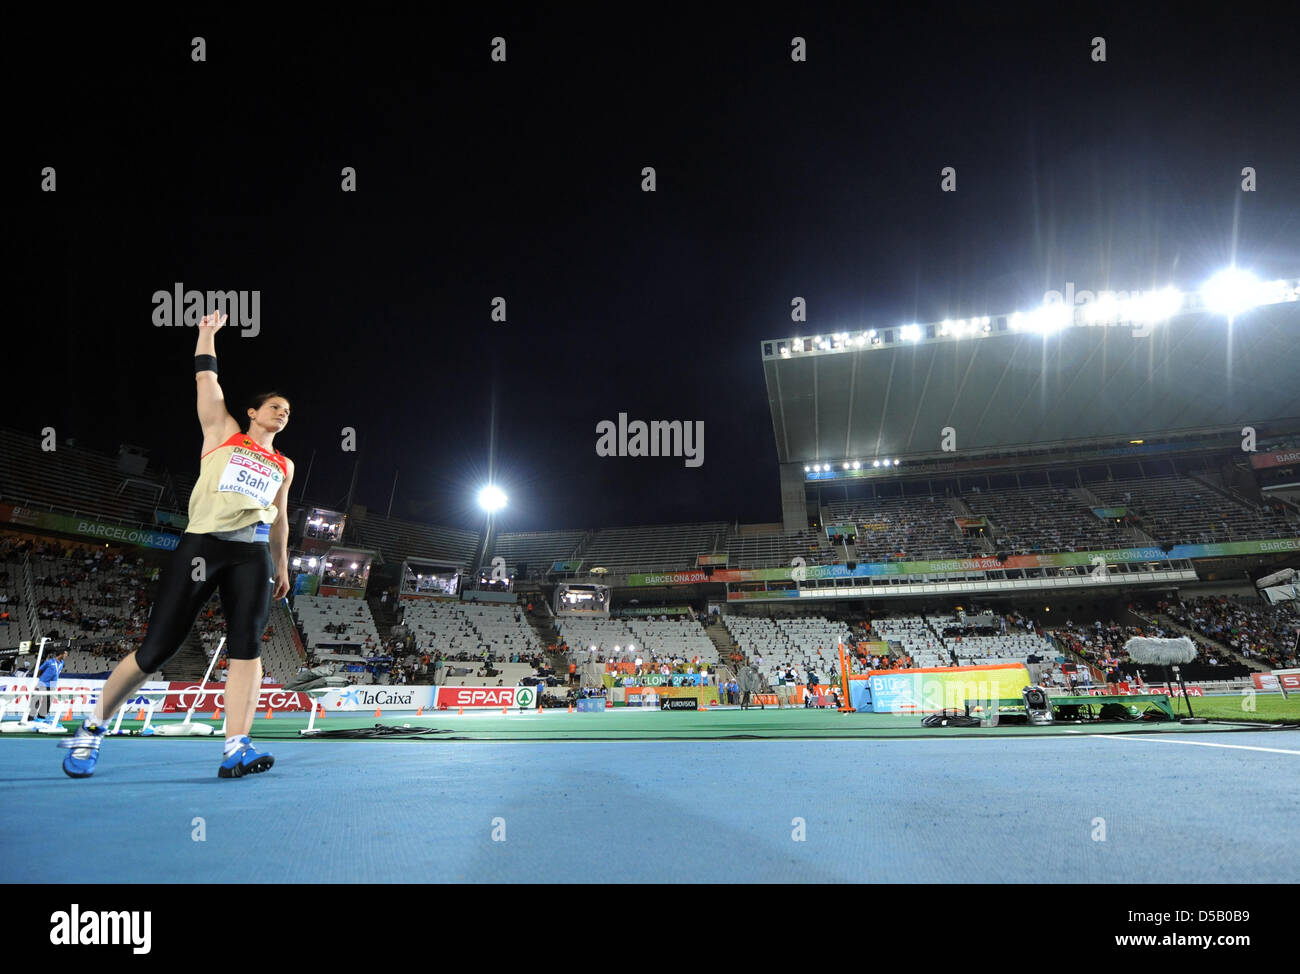 German javelin thrower Linda Stahl cheers after a throw at the Olympic stadium Lluis Companys during the European Athletics Championships in Barcelona, Spain, 29 July 2010. Photo: Rainer Jensen Stock Photo